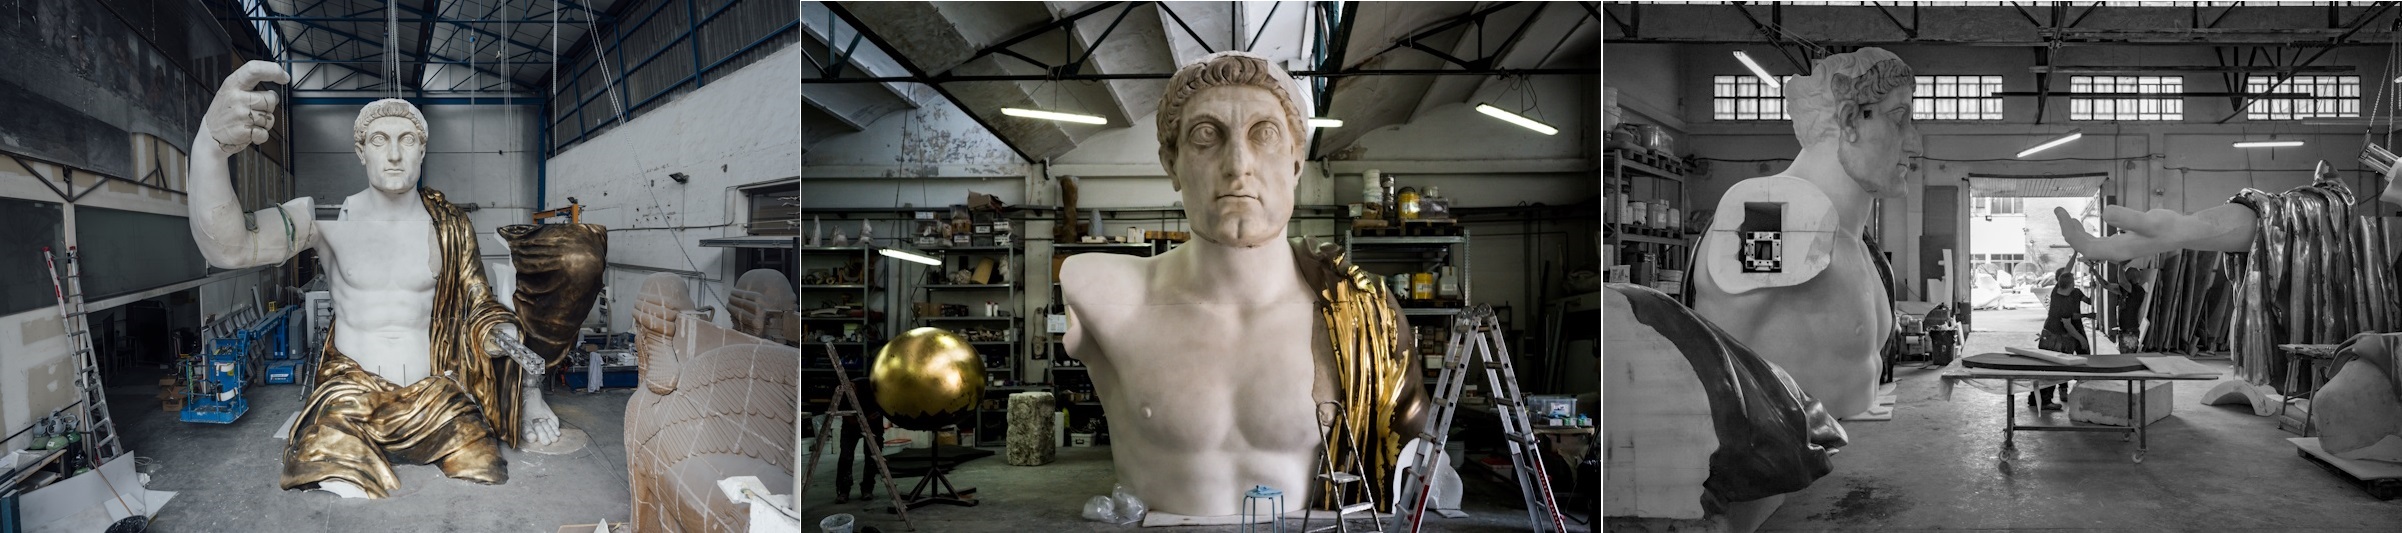 The Colossal Statue of Constantine: FREE Exhibition at the Capitoline Museums 82